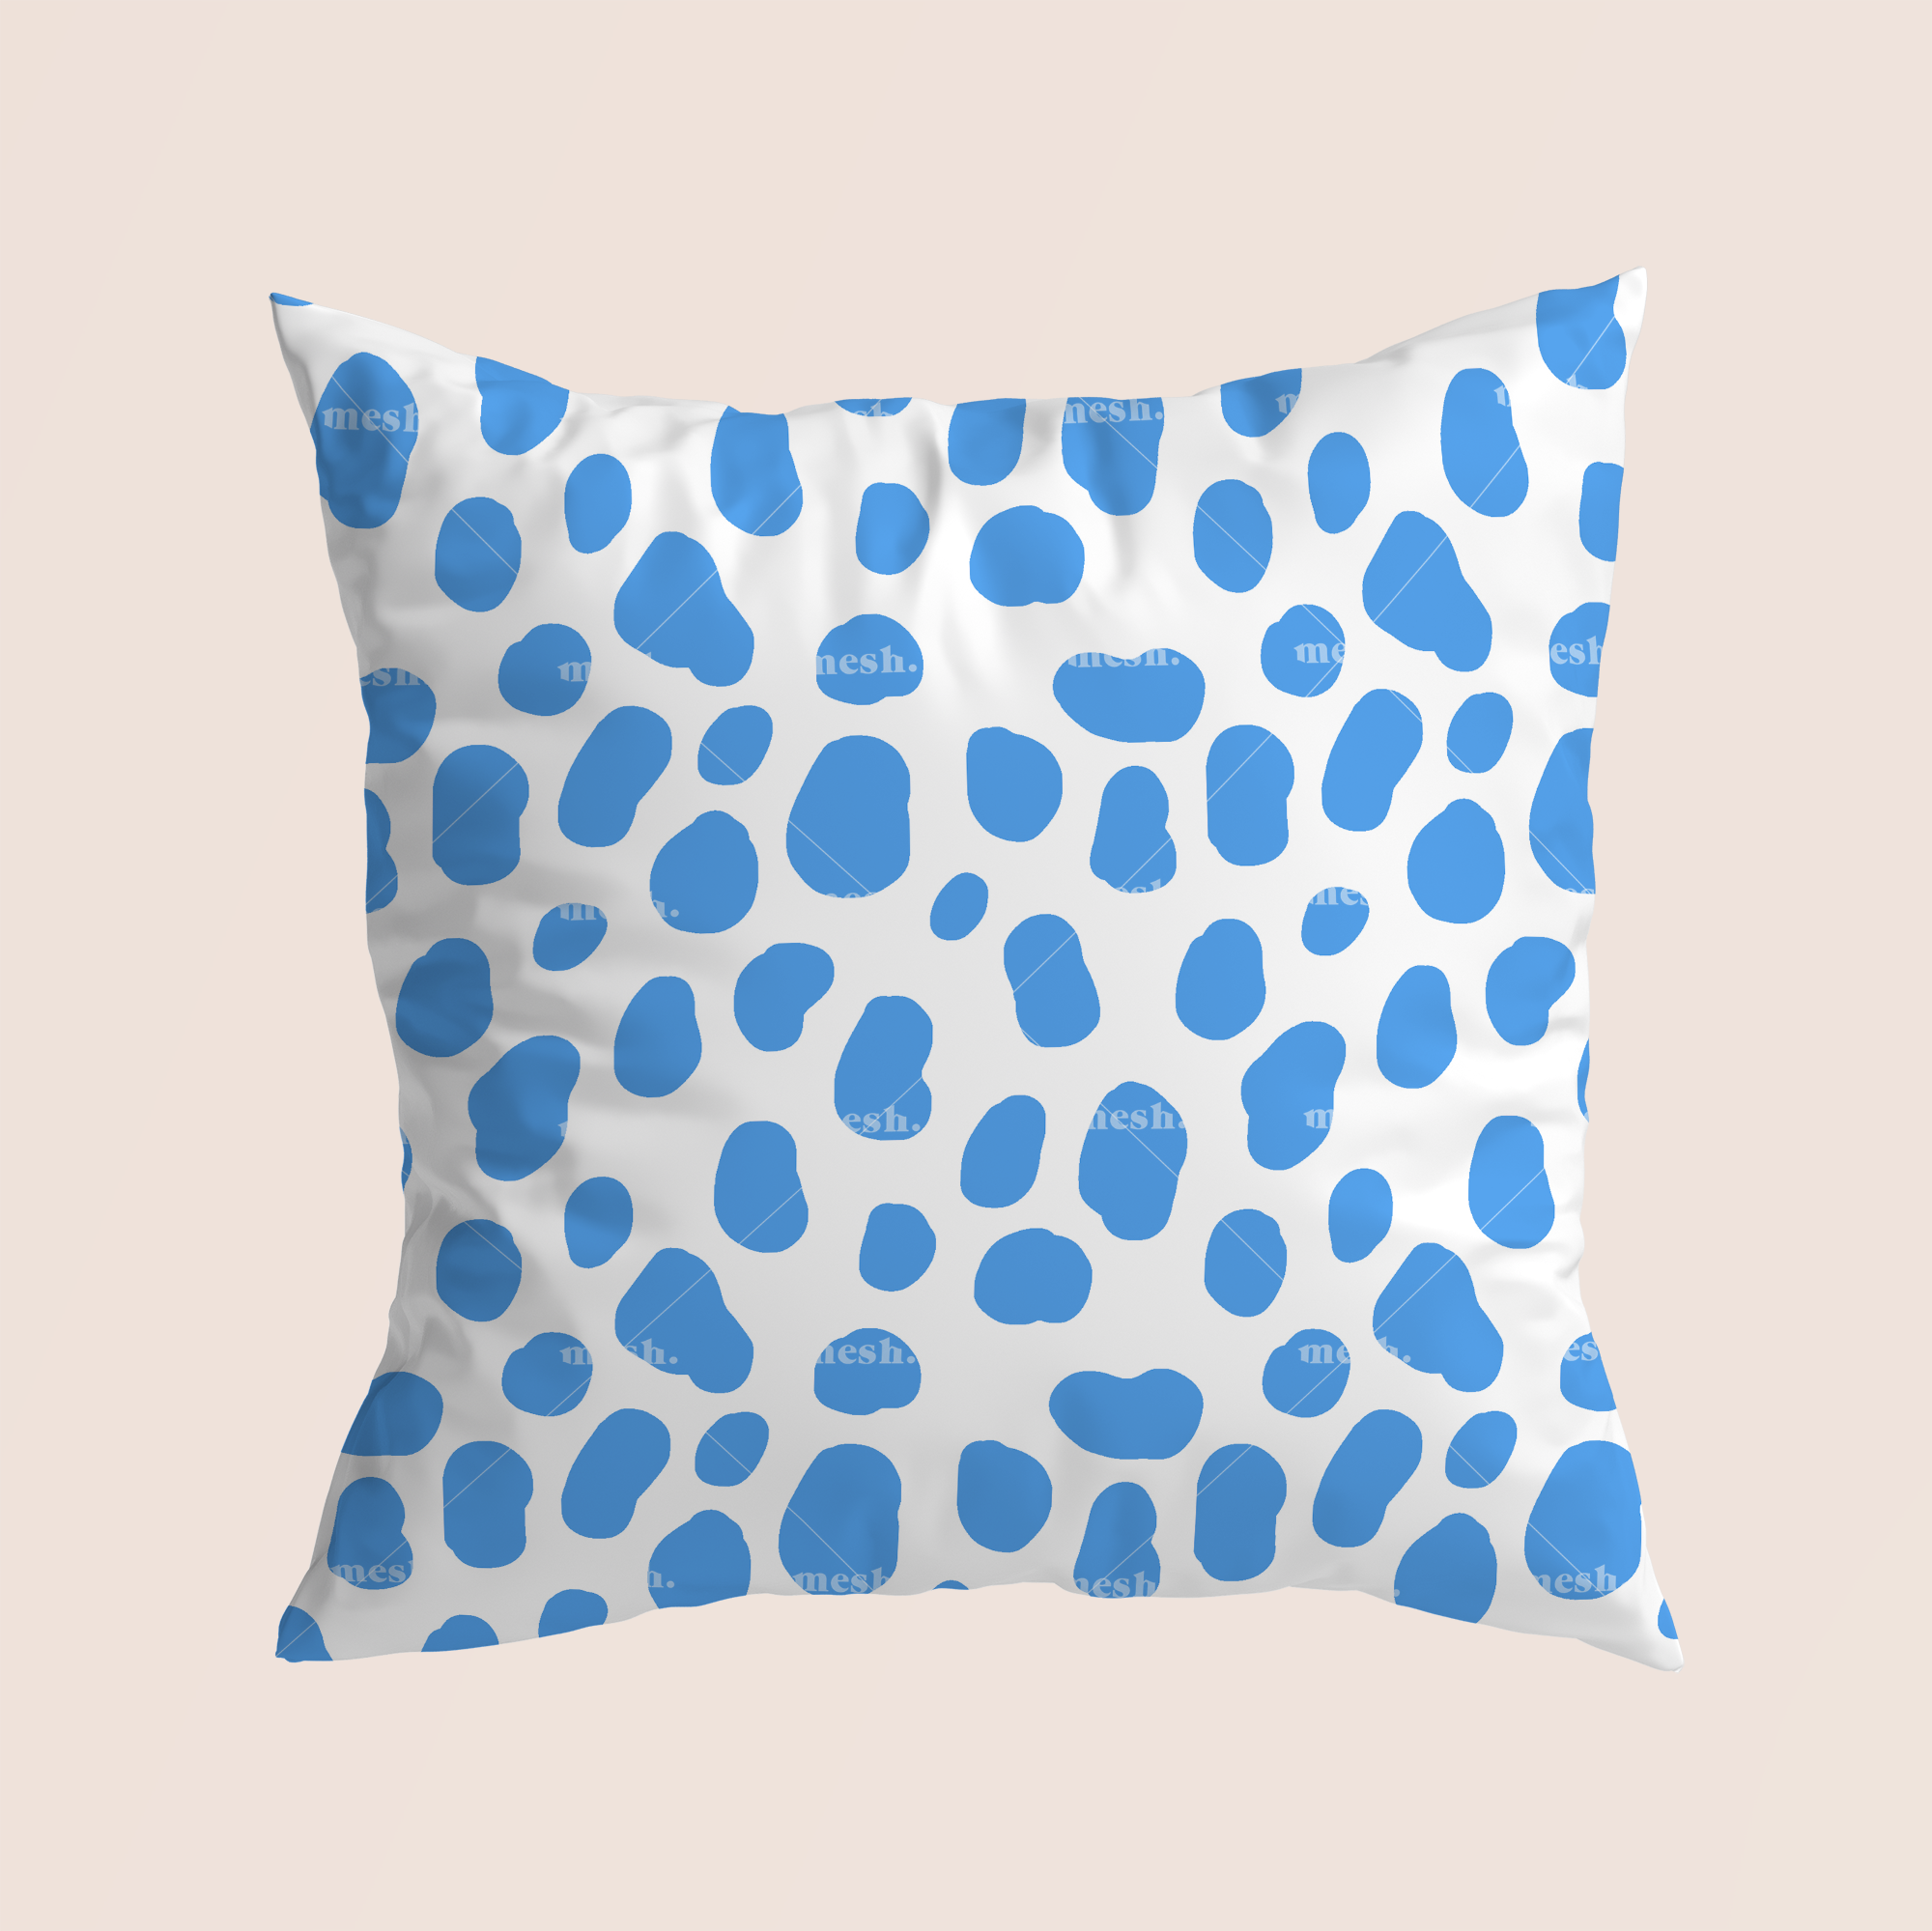 Wild animal coloured skin in blue pattern design printed on recycled fabric pillow